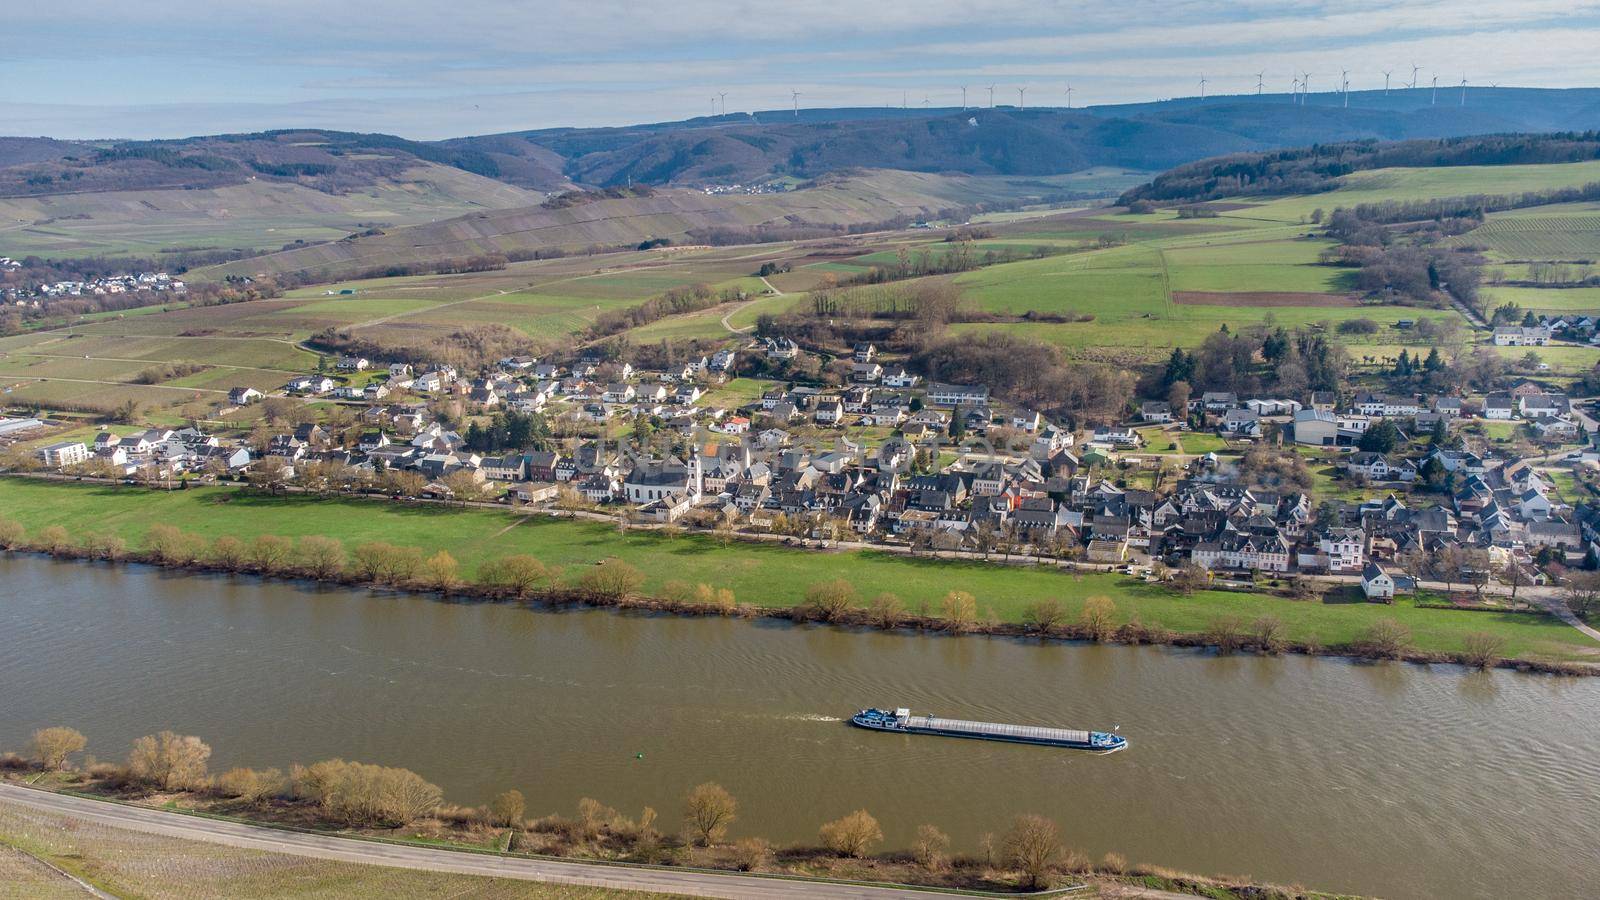 Aerial view of the river Moselle valley with cargo ship and the village Brauneberg 